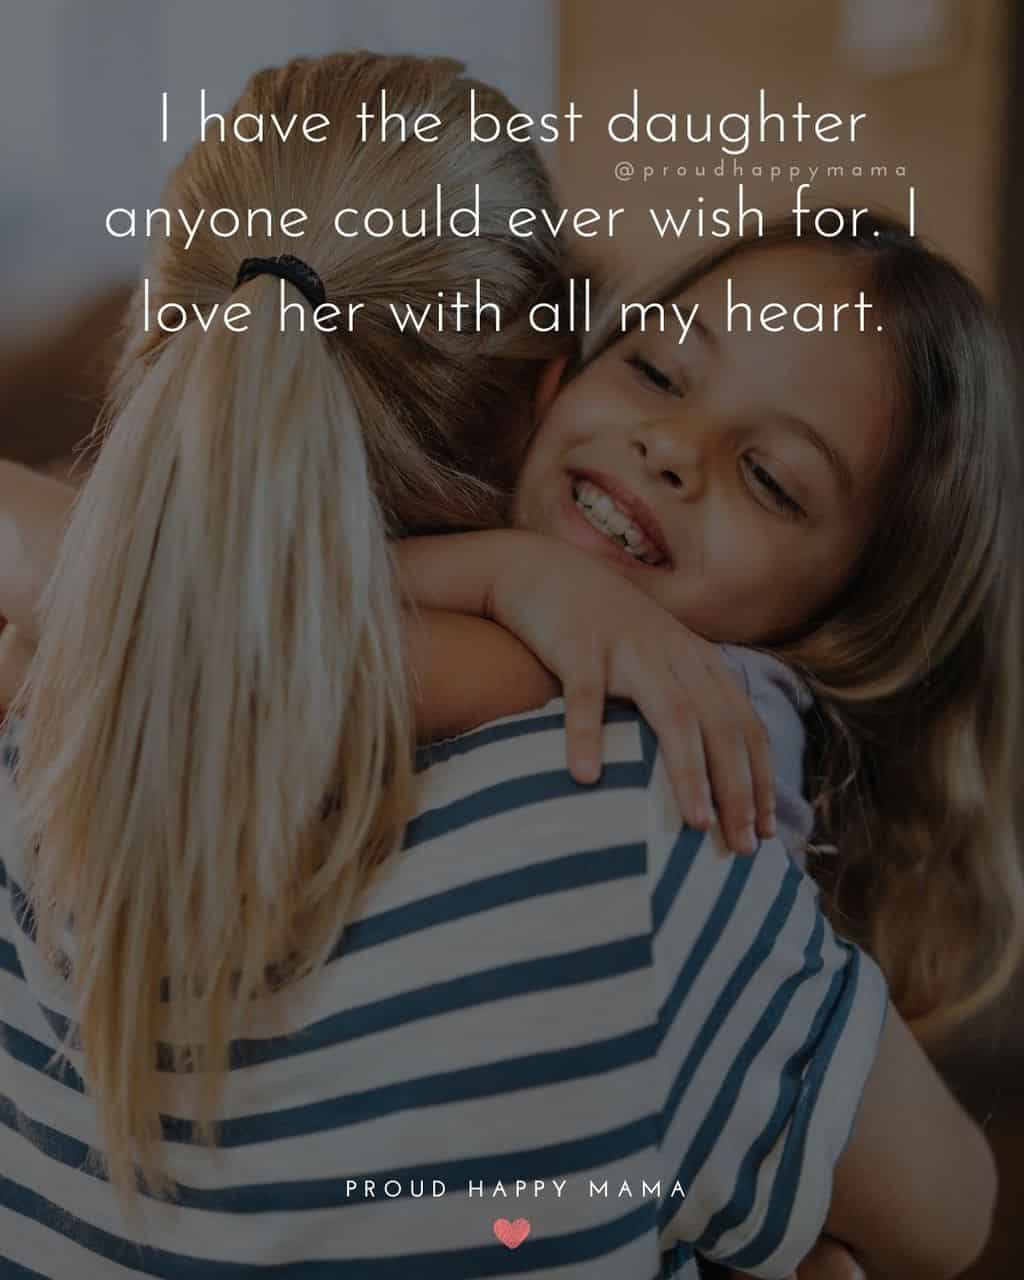 100+ BEST Daughter Quotes And Sayings [With Images]